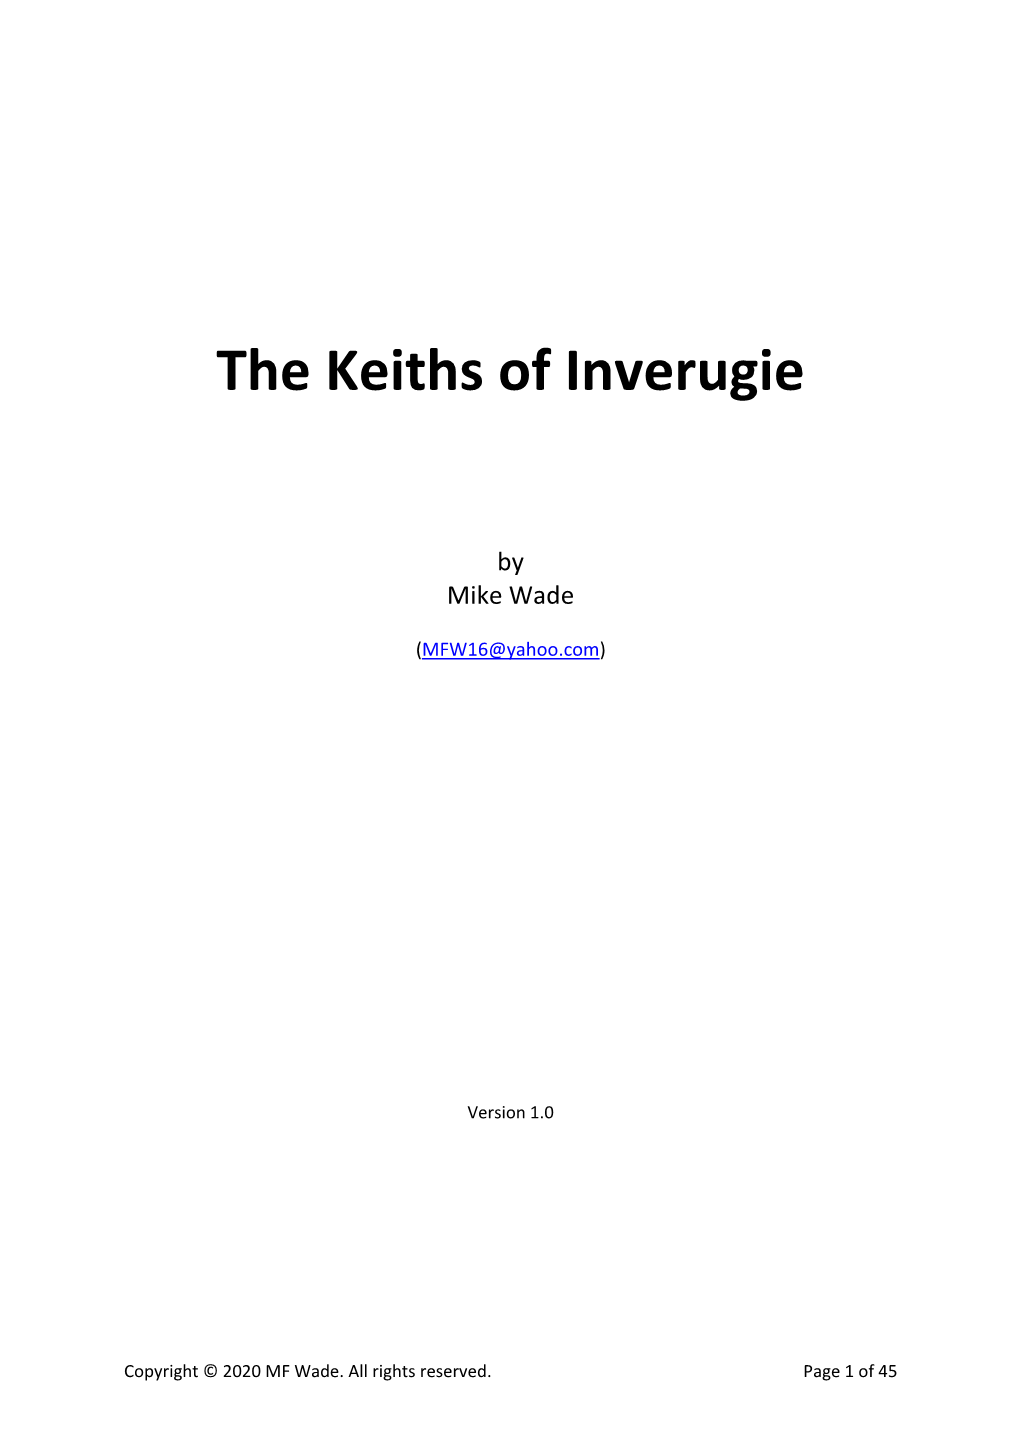 The Keiths of Inverugie